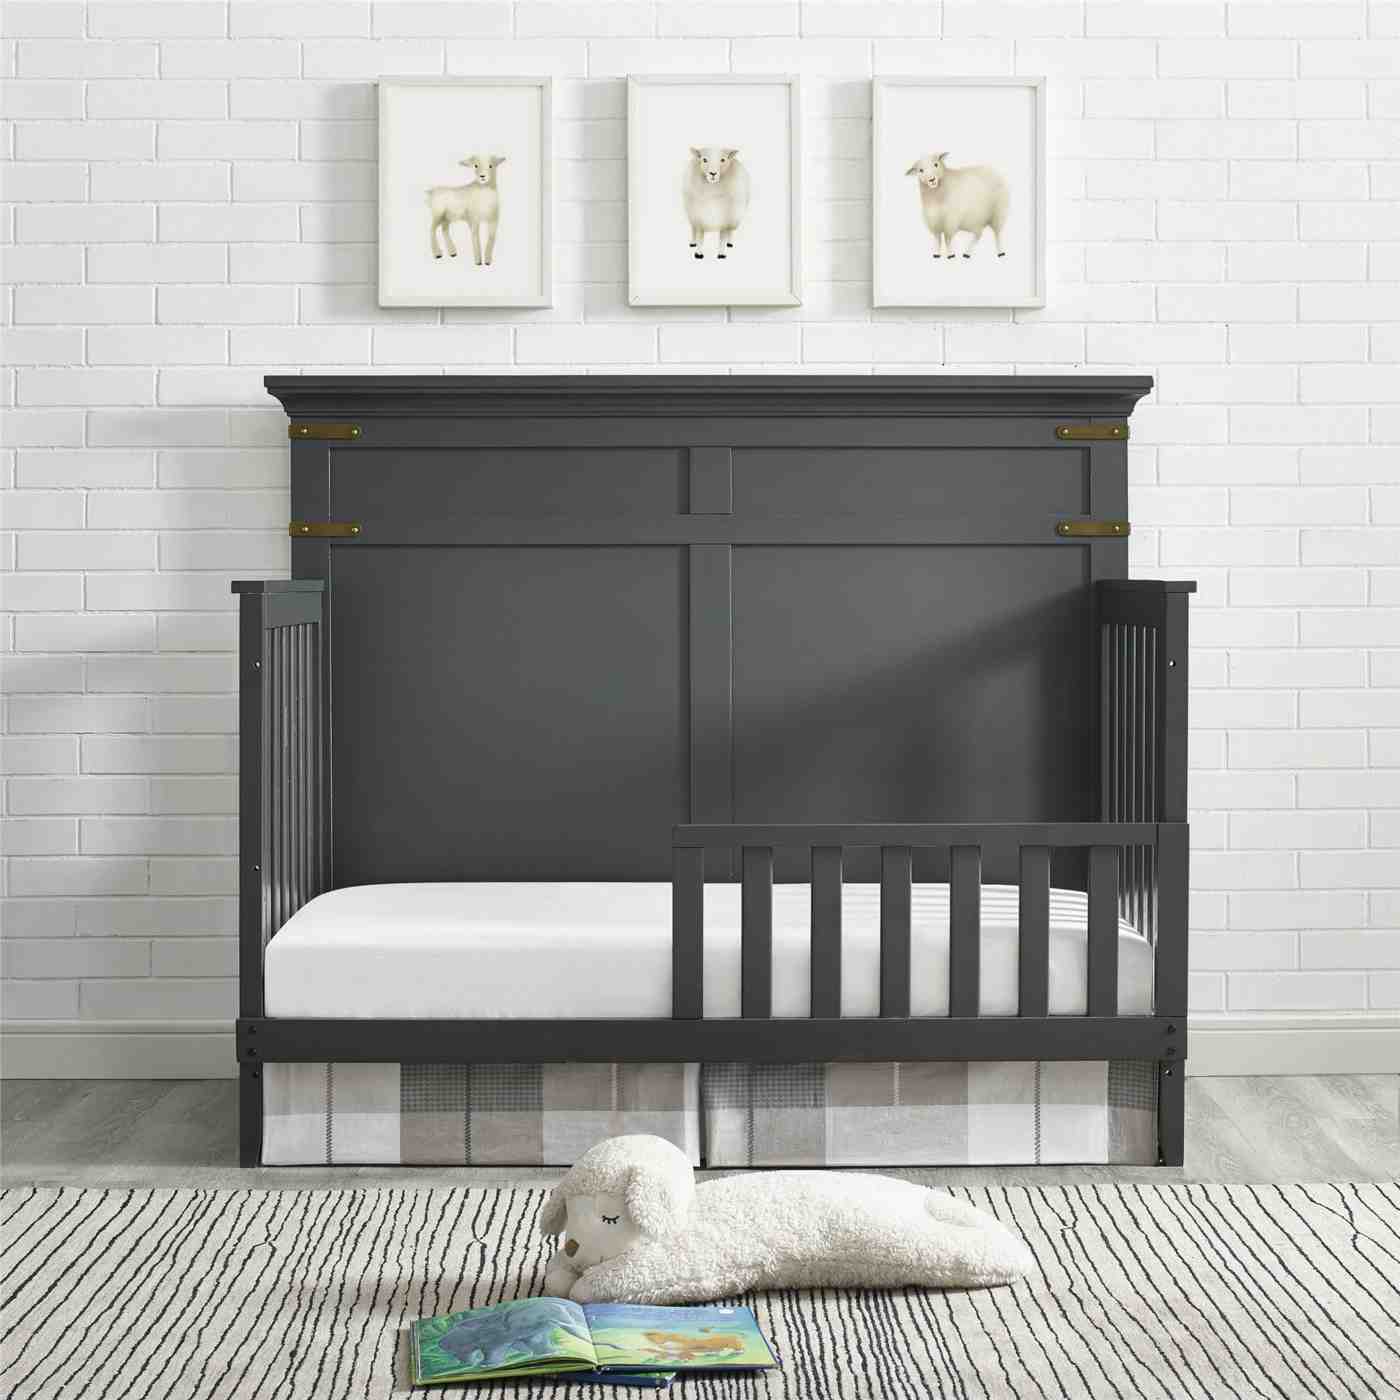 Baby bed is built into a baby bed with a protective grille